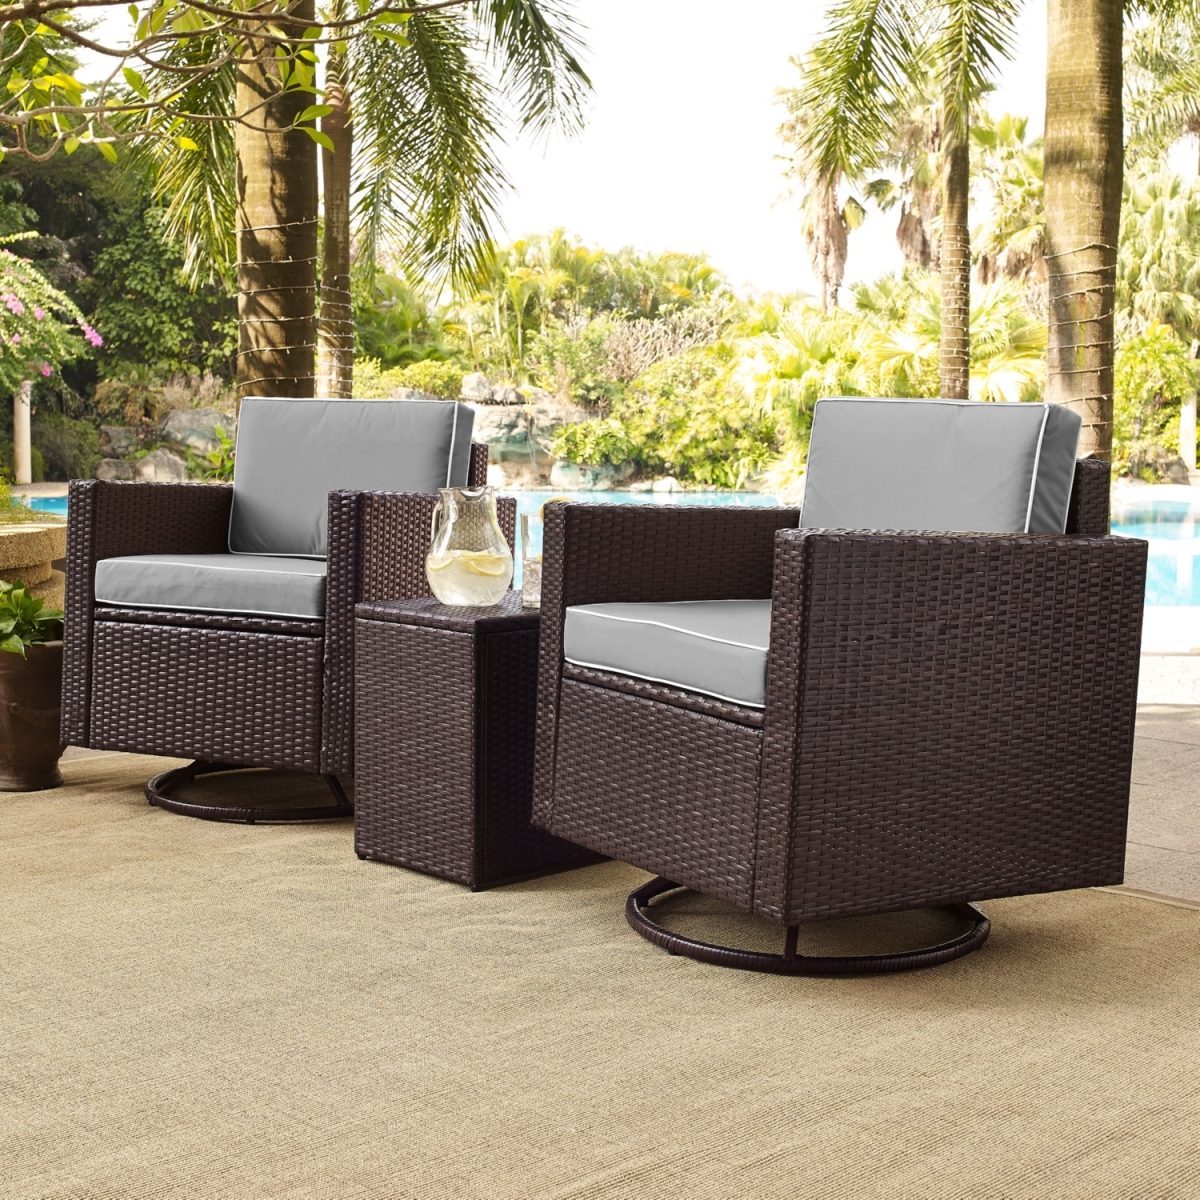 3-piece Palm Harbor Outdoor Wicker Conversation Set With Grey Cushions, Two Swivel Chairs & Side Table